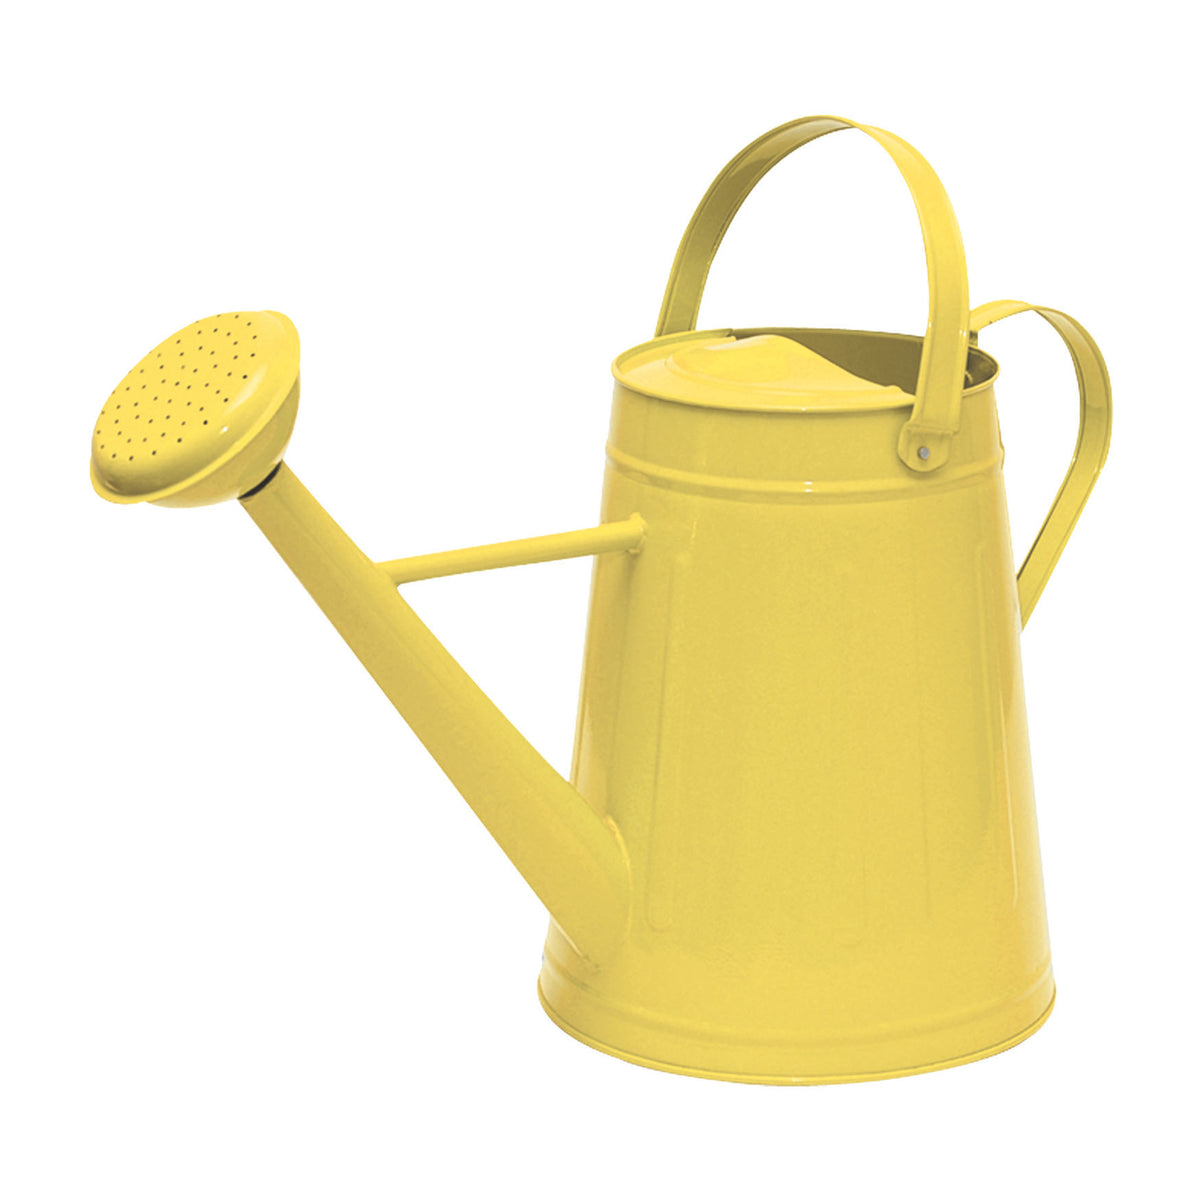 2.1 Gal Yellow Metal Watering Can. Made of steel. 3.5&quot;x 6&quot; 20&quot;L x 9&quot;W x 15.5&quot;H, 2lbs.